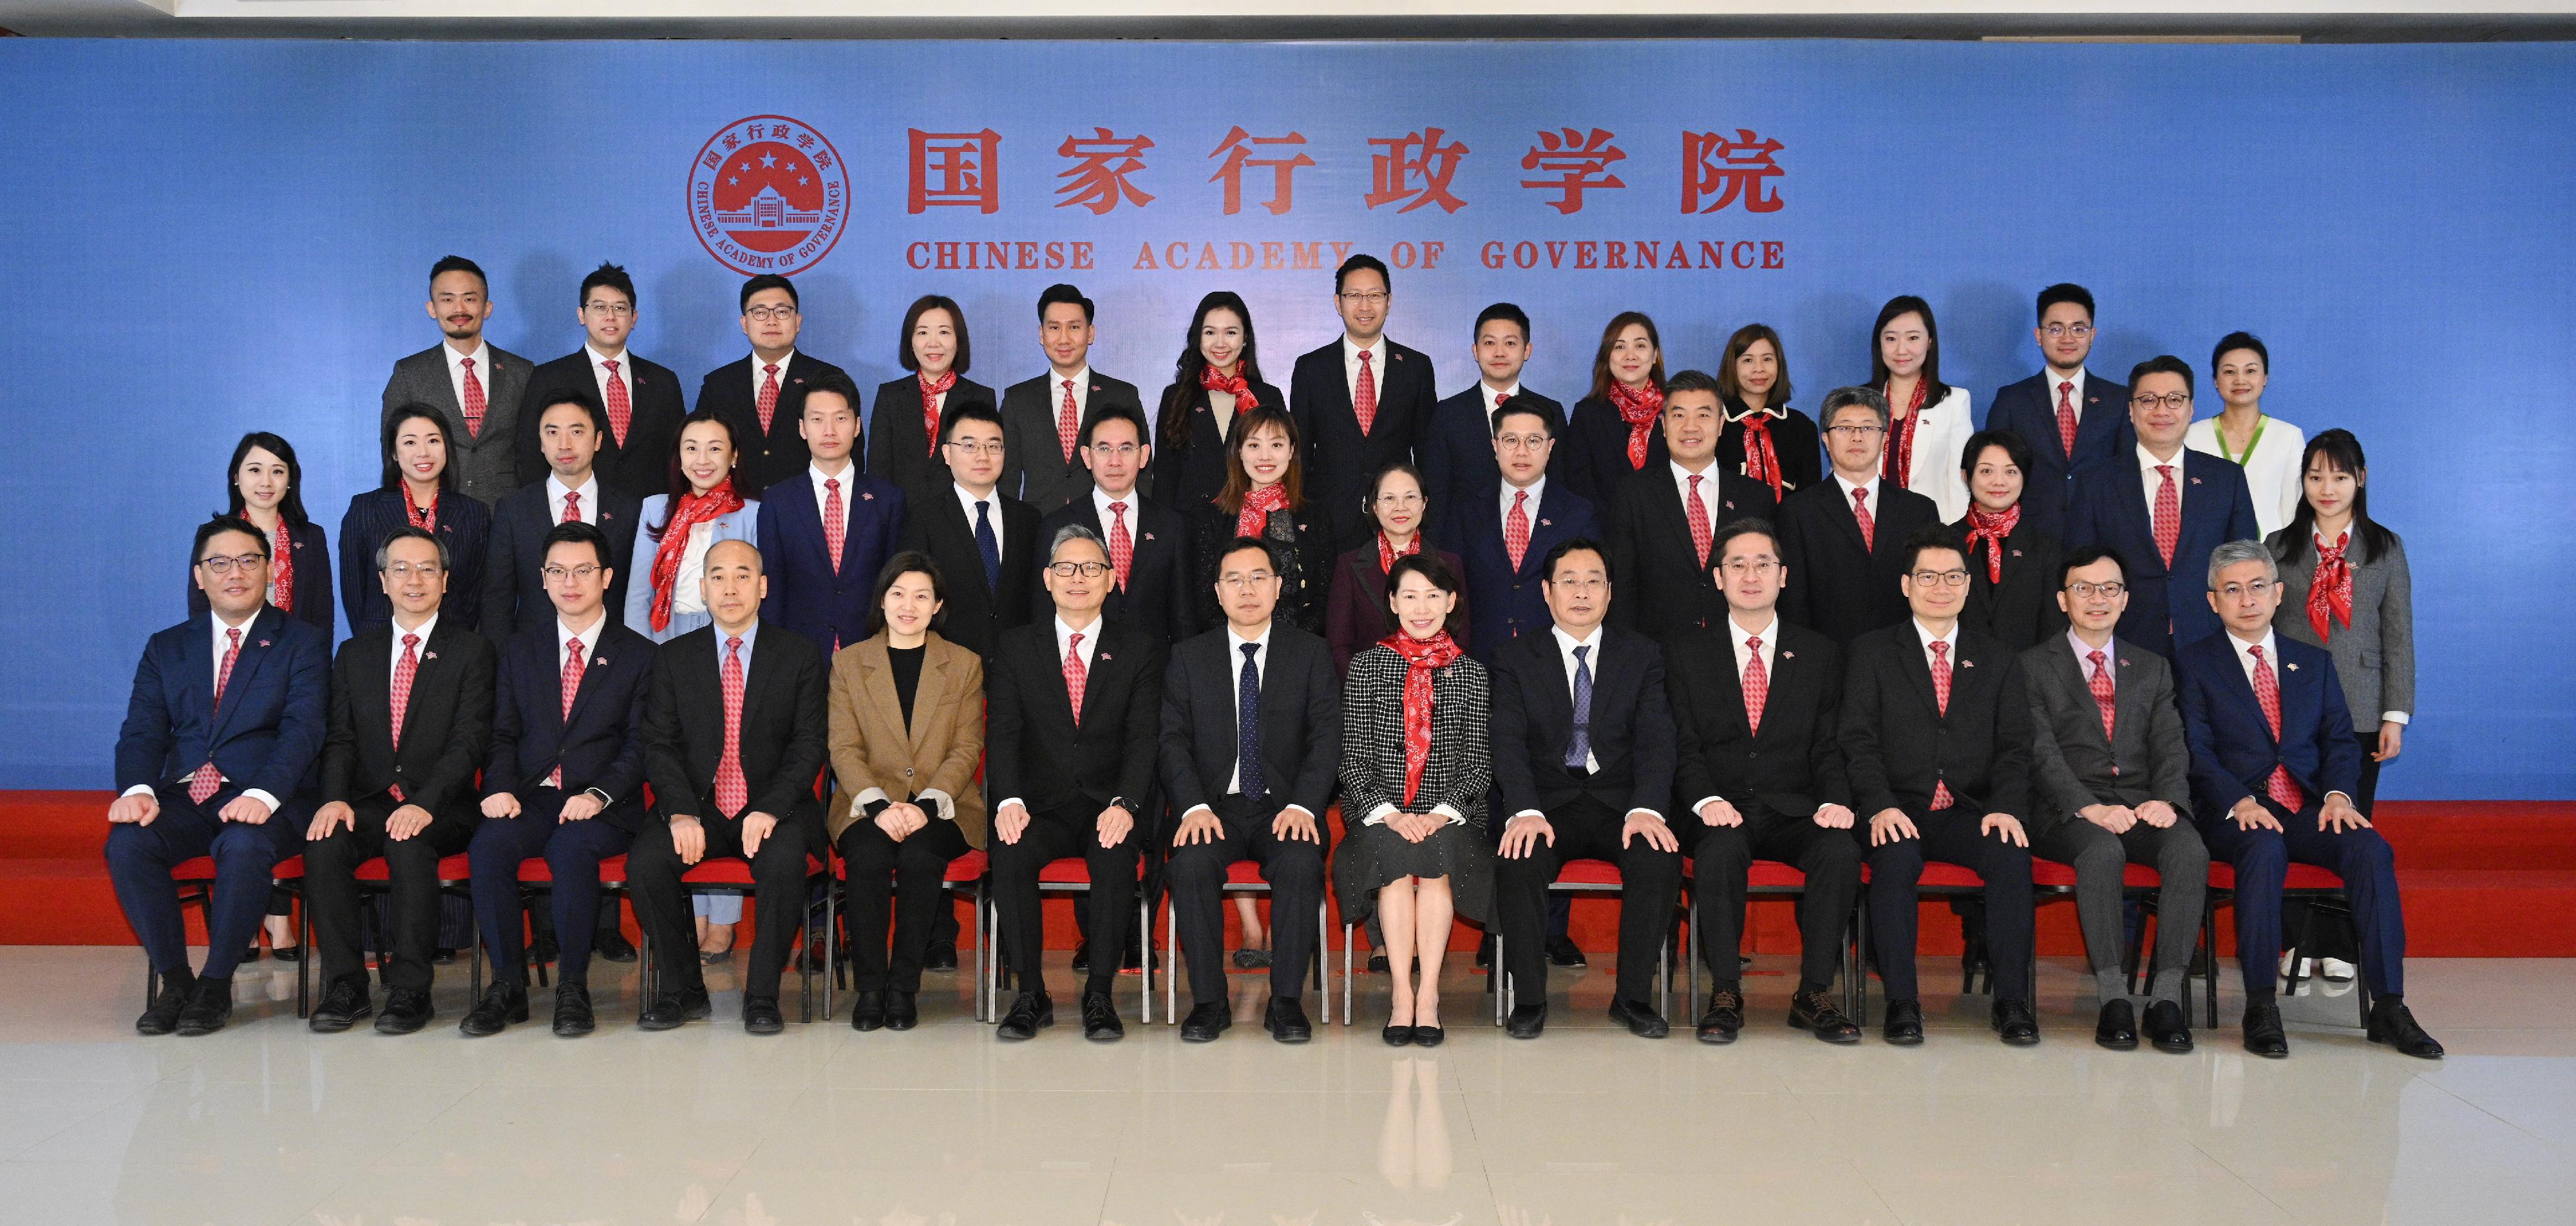 A delegation of politically appointed officials led by the Director of the Chief Executive's Office, Ms Carol Yip, began its national studies programme in Beijing yesterday (November 20) morning. Photo shows Deputy Director of the National Academy of Governance (NAG) Mr Li Wentang (front row, centre); the Director-General of the International and Hong Kong and Macau Training Center of the NAG, Mr Xie Yutong (front row, fifth right); Ms Yip (front row, sixth right); with the delegates at the programme's opening ceremony.